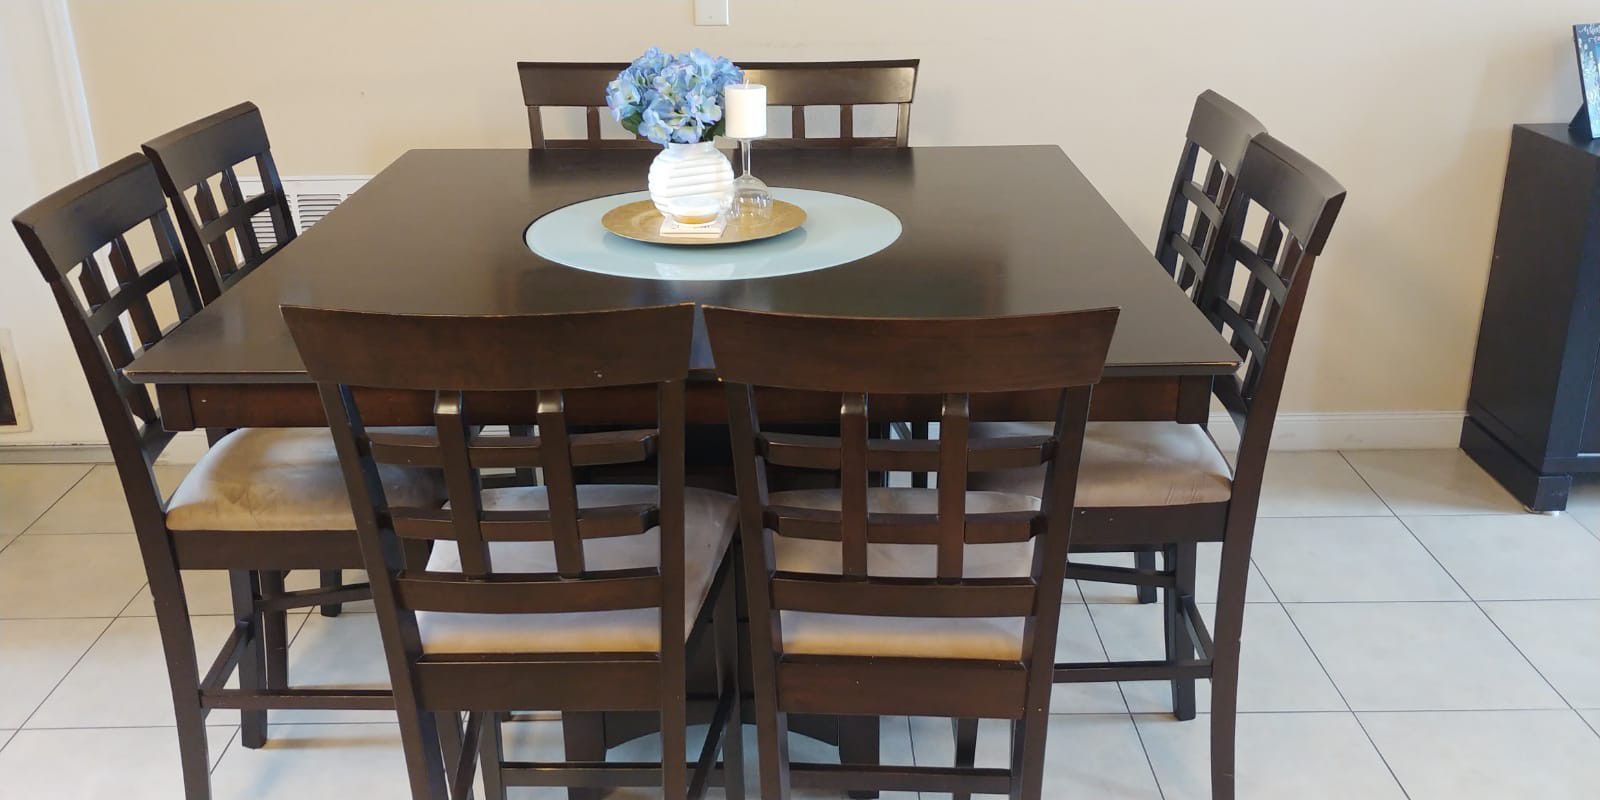 Counter height square dining table with 8 chairs